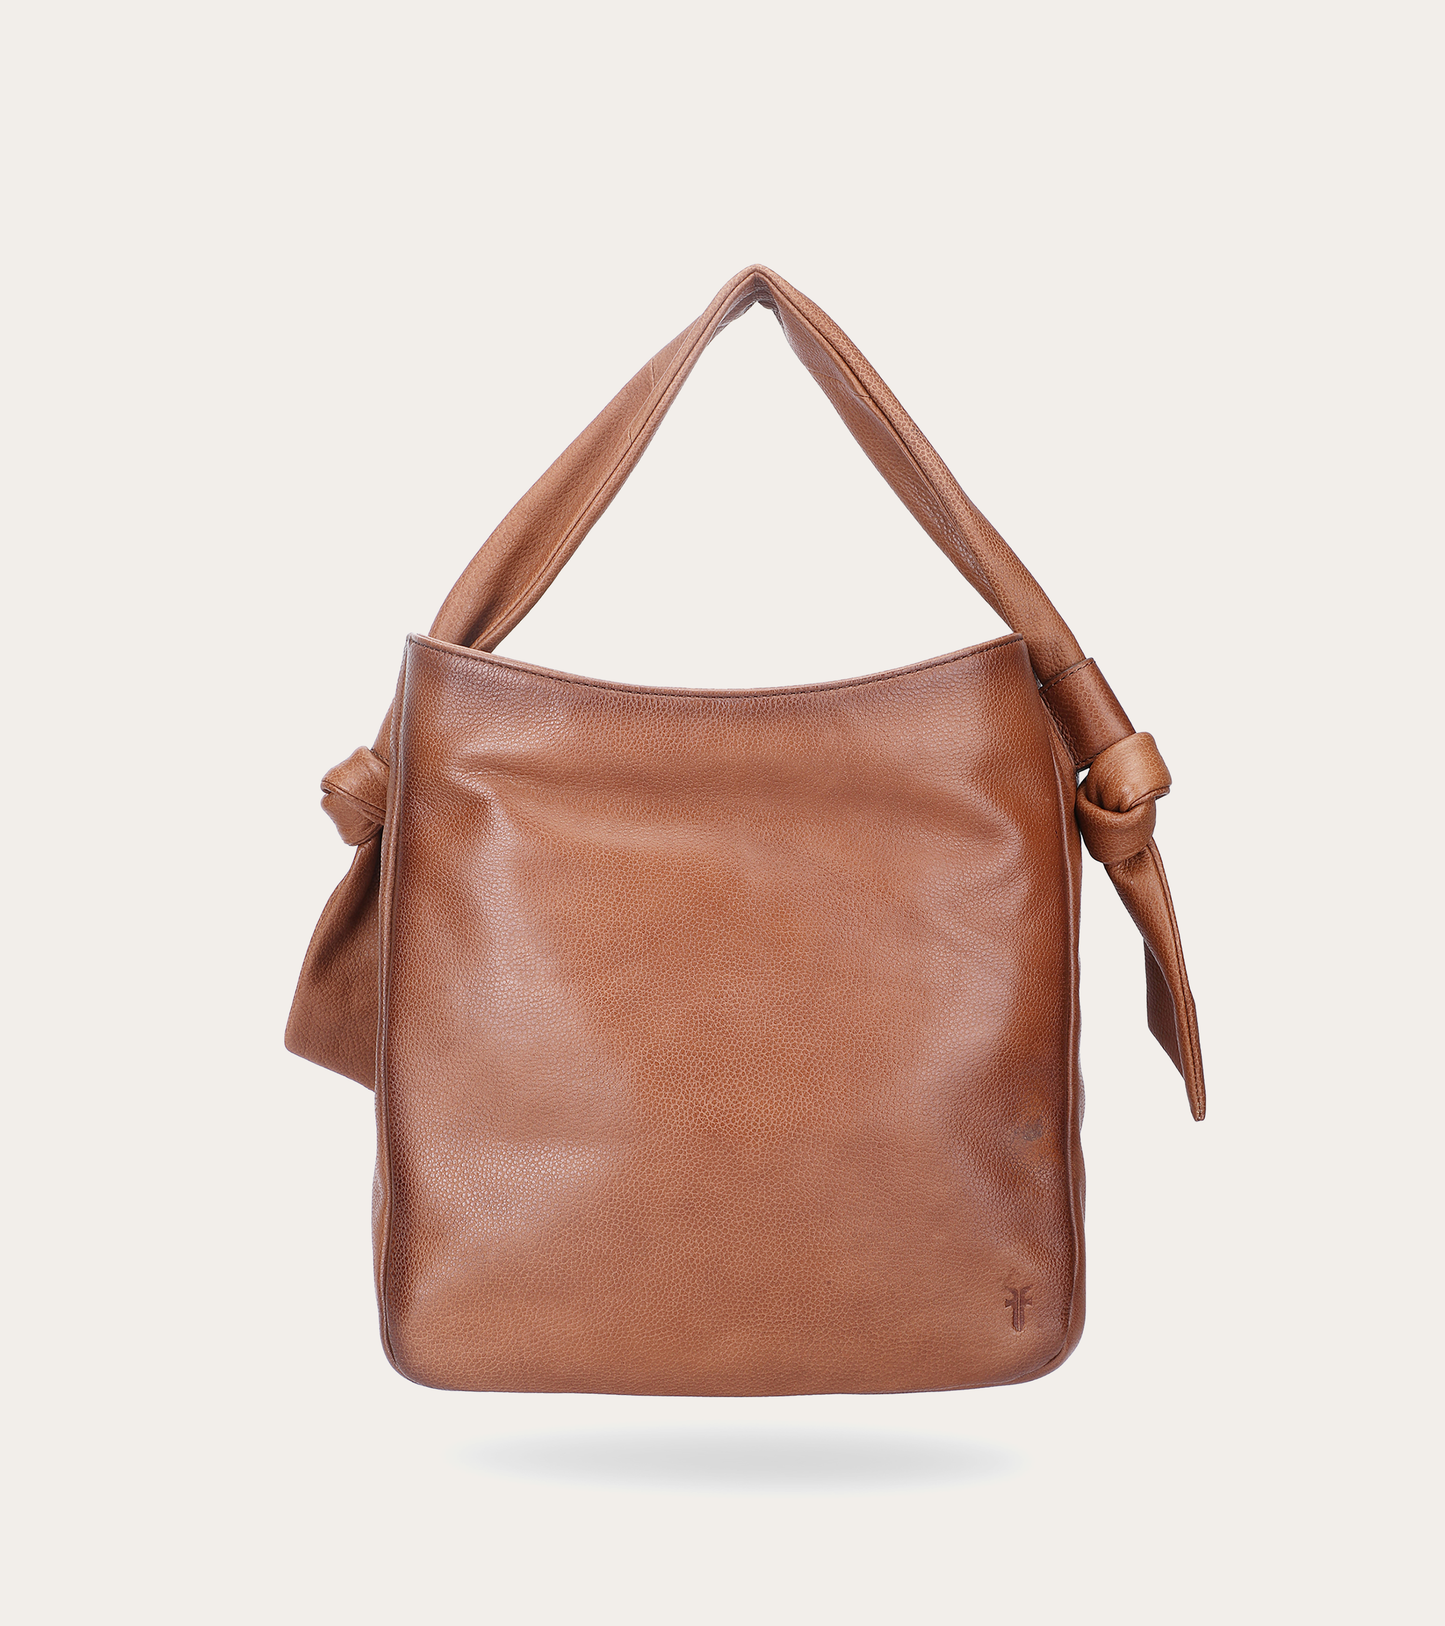 Nora Knotted Hobo Bag | Women's Leather Bag | Frye